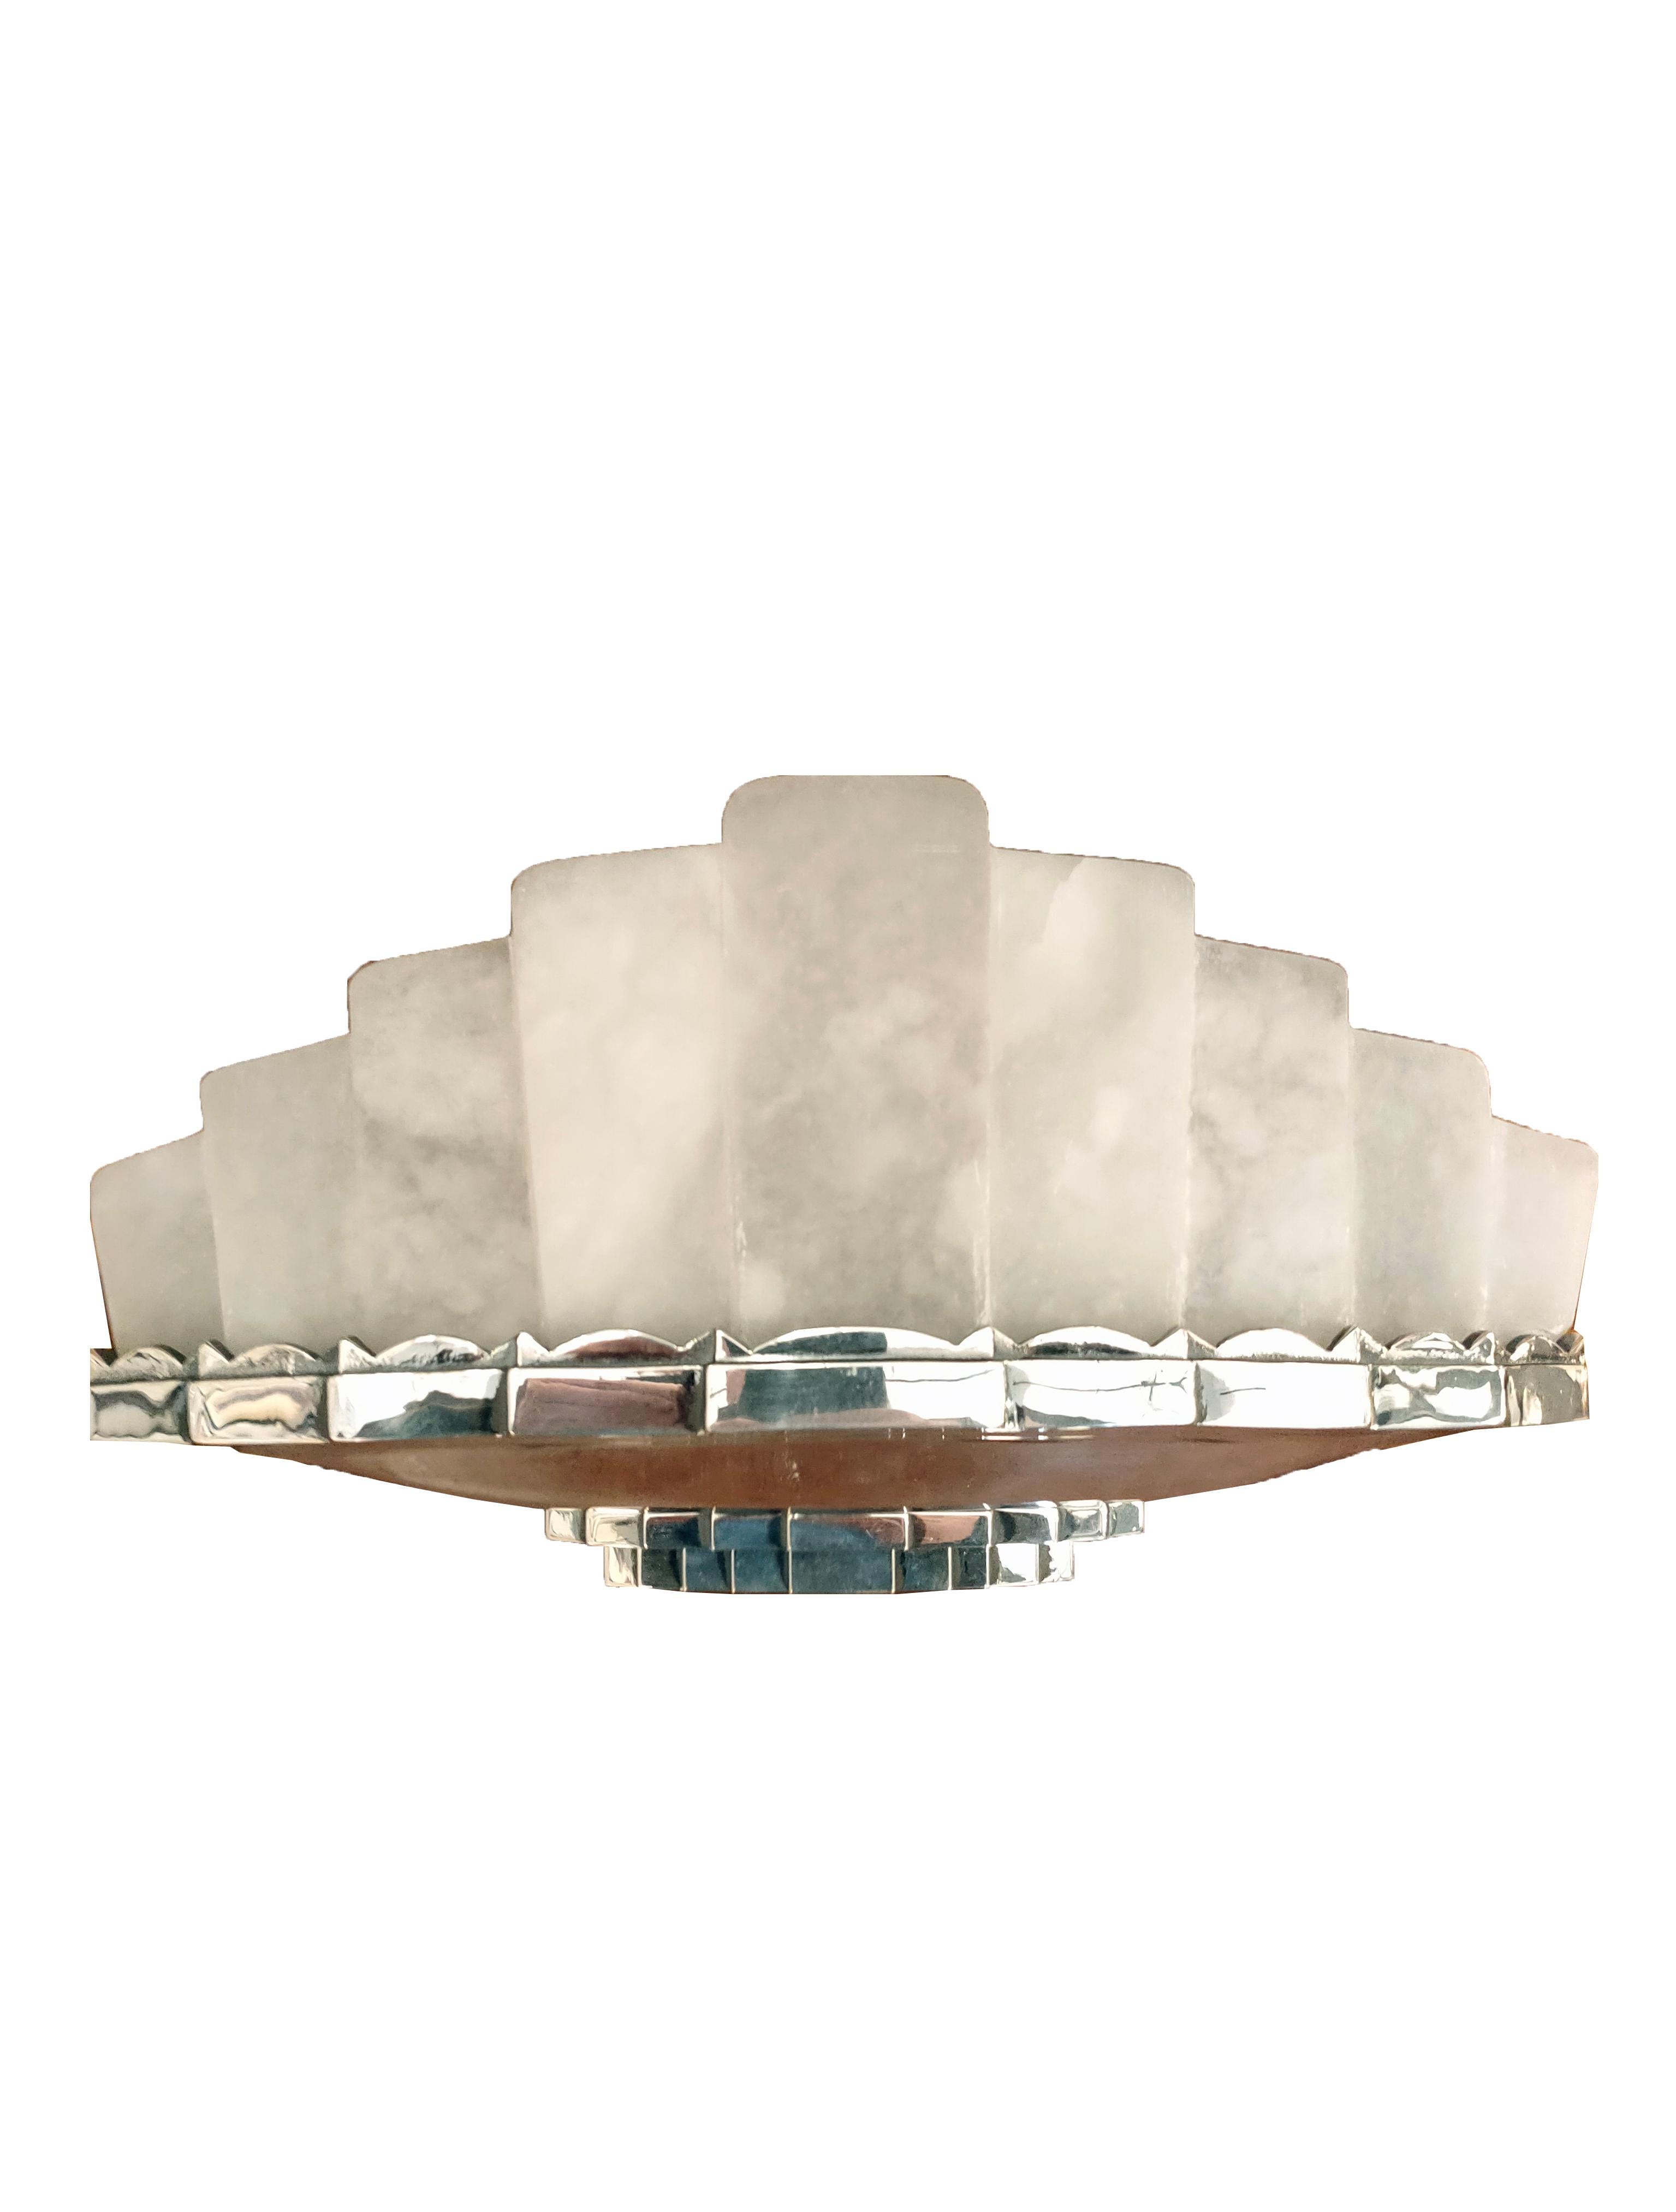 French Leleu, Pair of Art Deco Sconces, Alabaster, Silver Plated Bronze Frames. 1929 For Sale